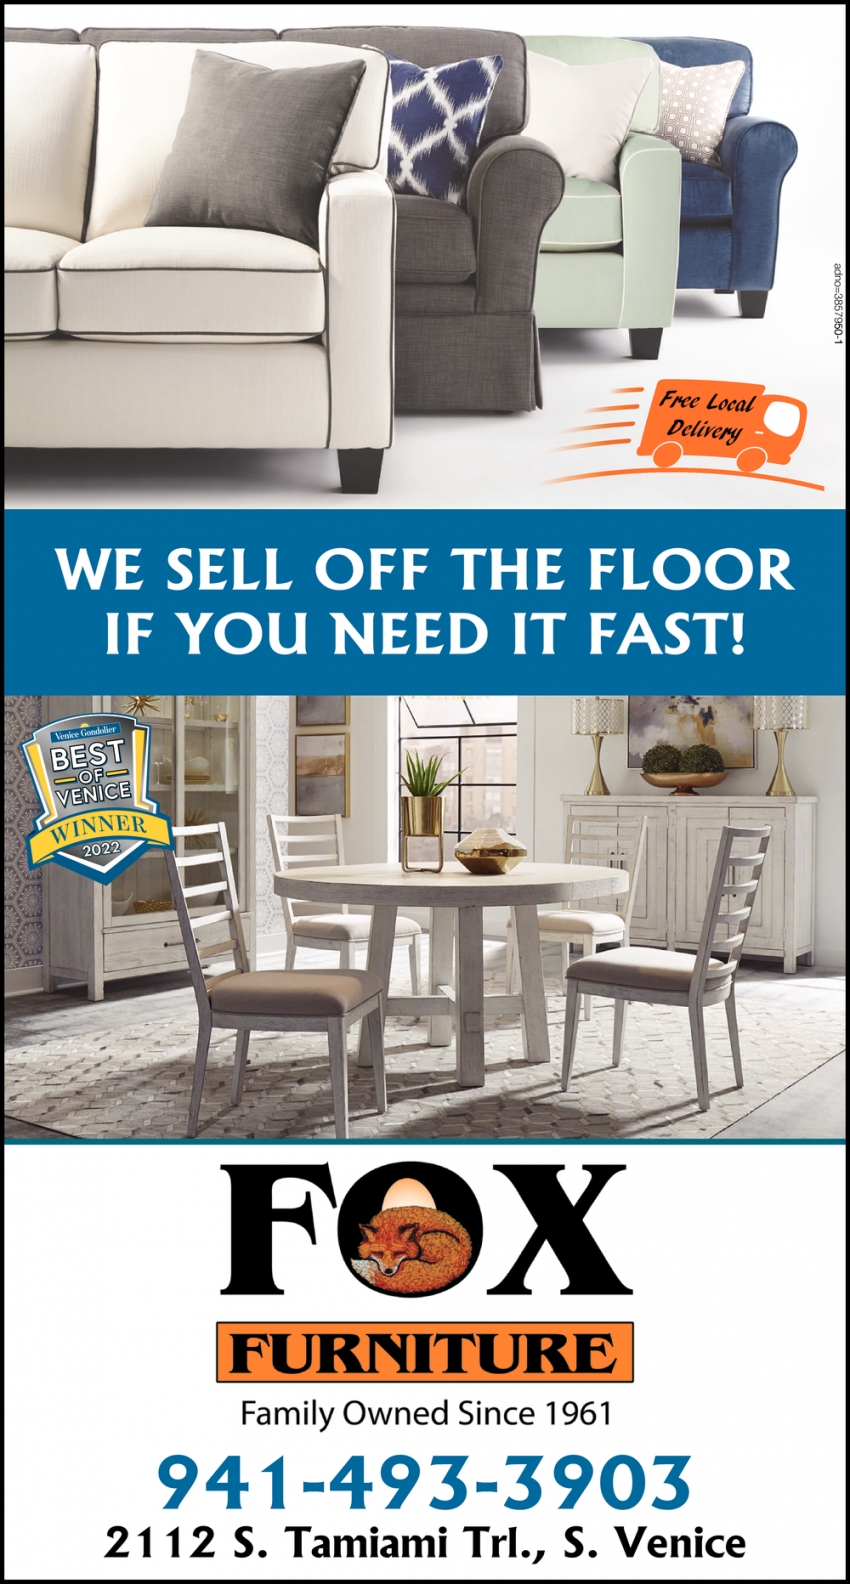 We Sell Off the Floor if You Need It Fast!